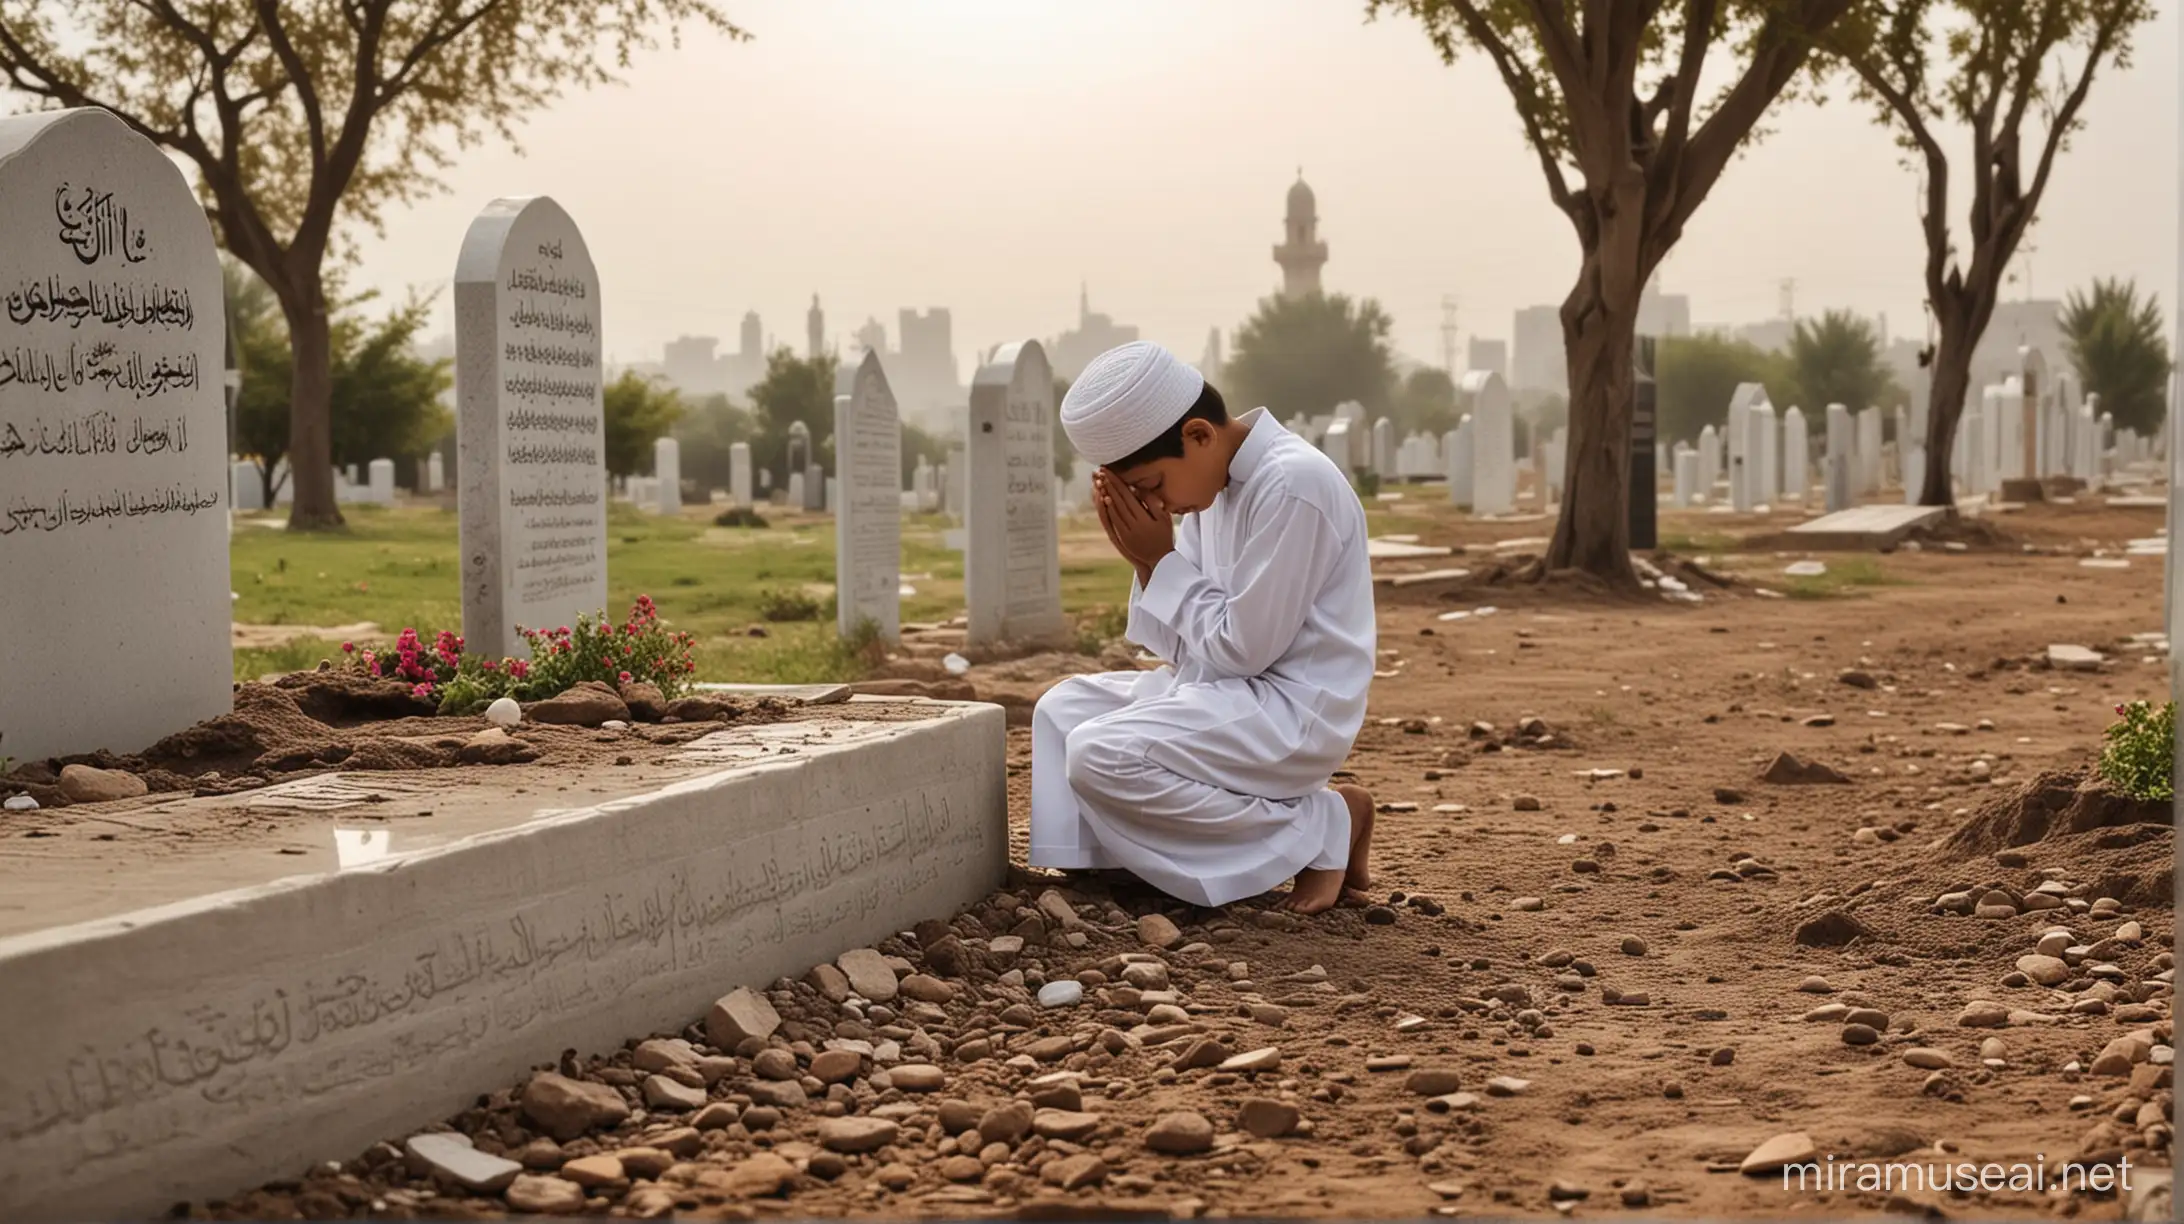 a islamic picture
A muslim  boy praying by rasing hand near his parents grave